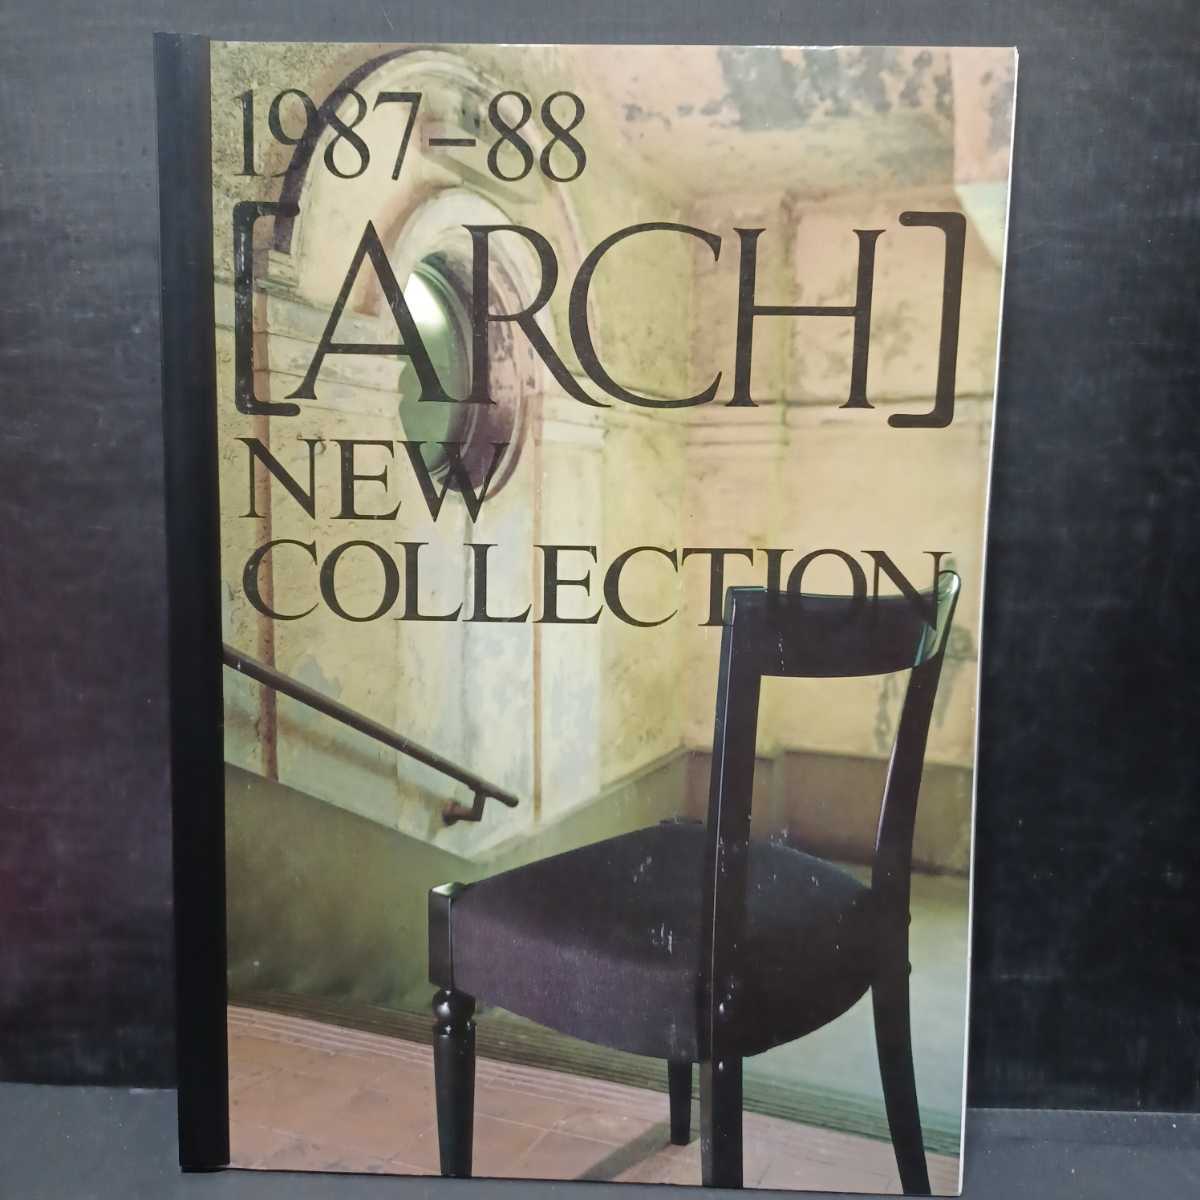 「ARCH」1987-88　new collection カタログ　チェア　ソファ　ヴィンテージ家具　モダン家具　046_画像1